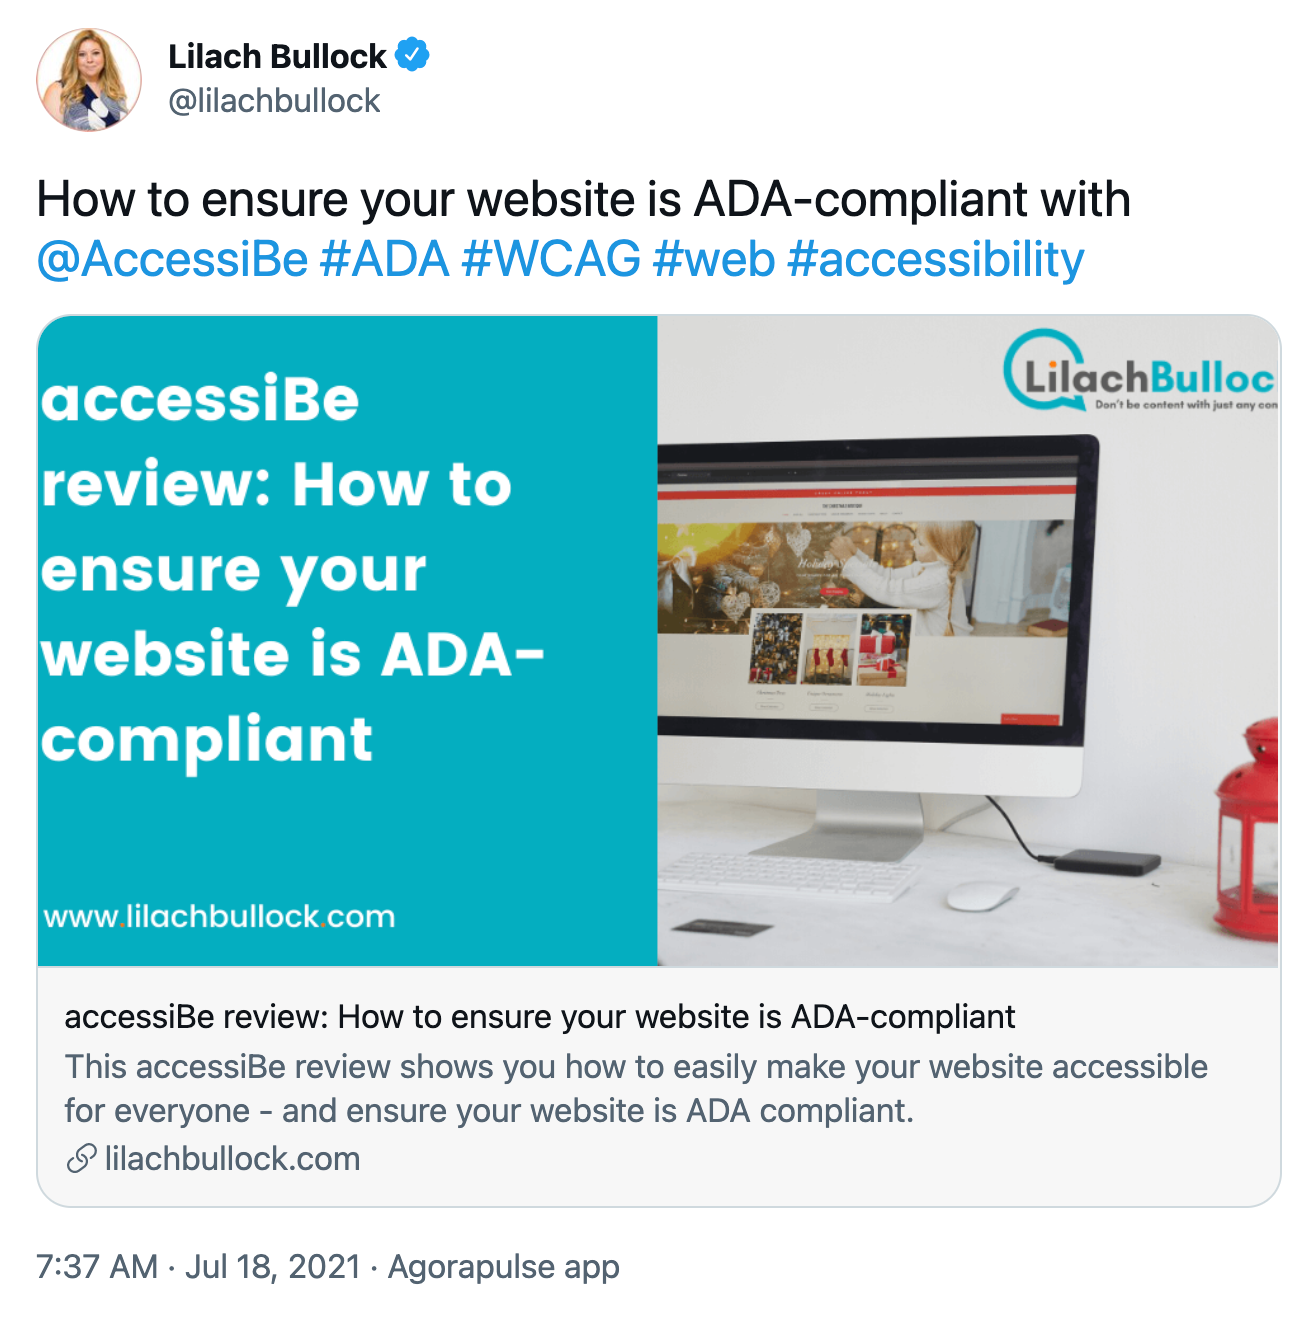 How to ensure your website is ADA-compliant with @AccessiBe #ADA #WCAG #web #accessibility. Screenshot of a tweet by Lilach Bullock, posted to Twitter on July 18th, 2021 via the Agorapulse app.